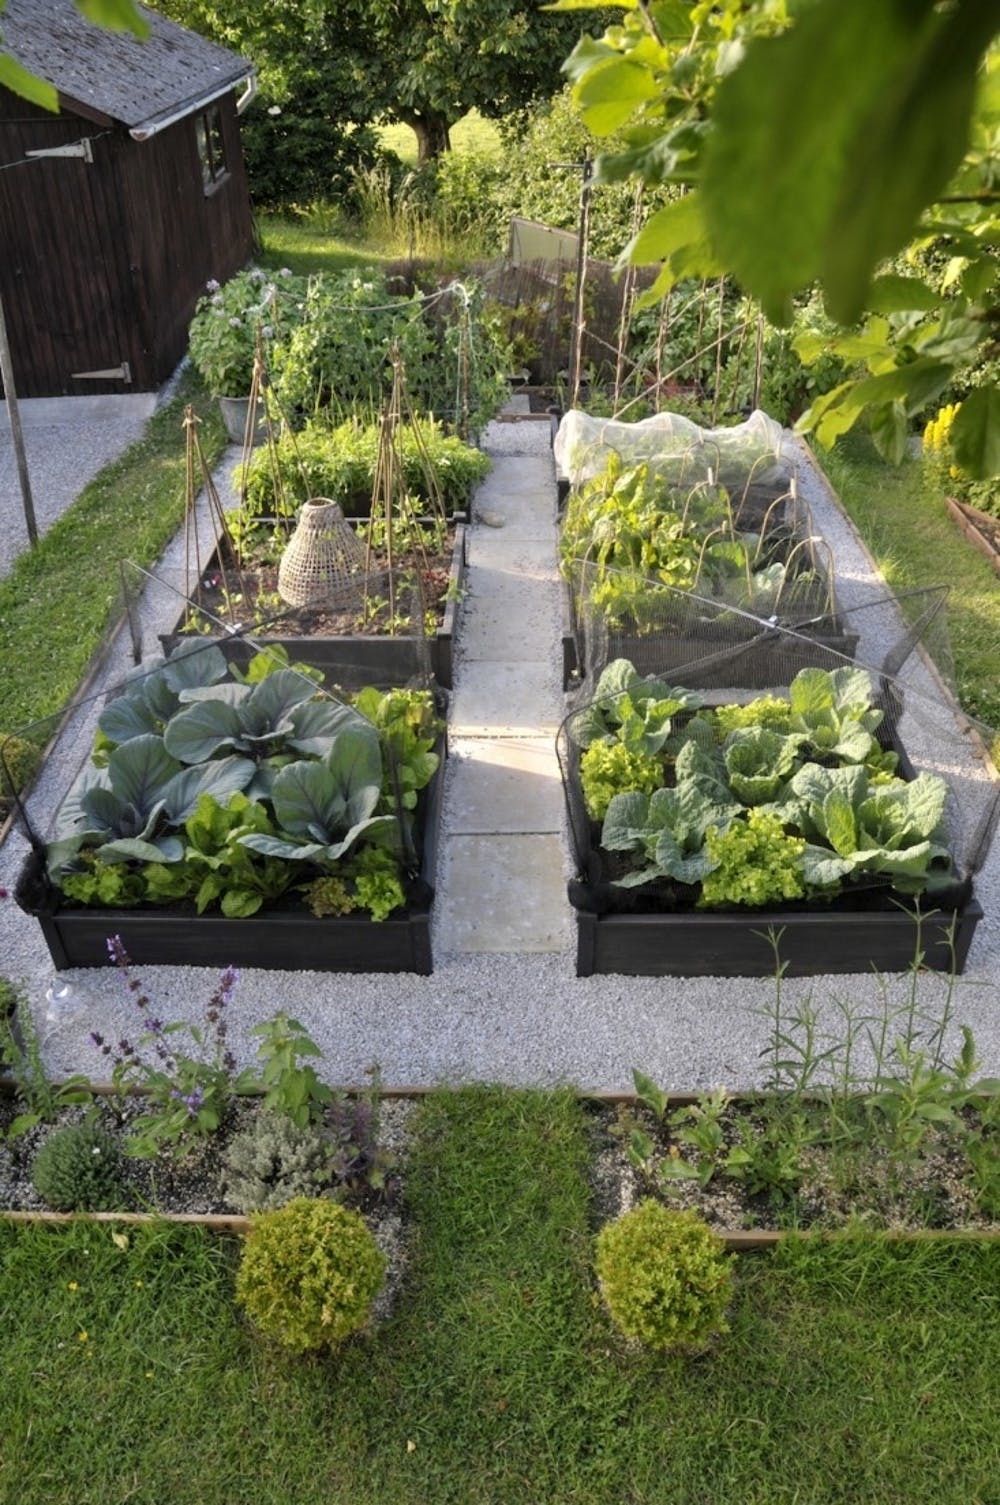 The Benefits of Raised Garden Beds for Your Plants